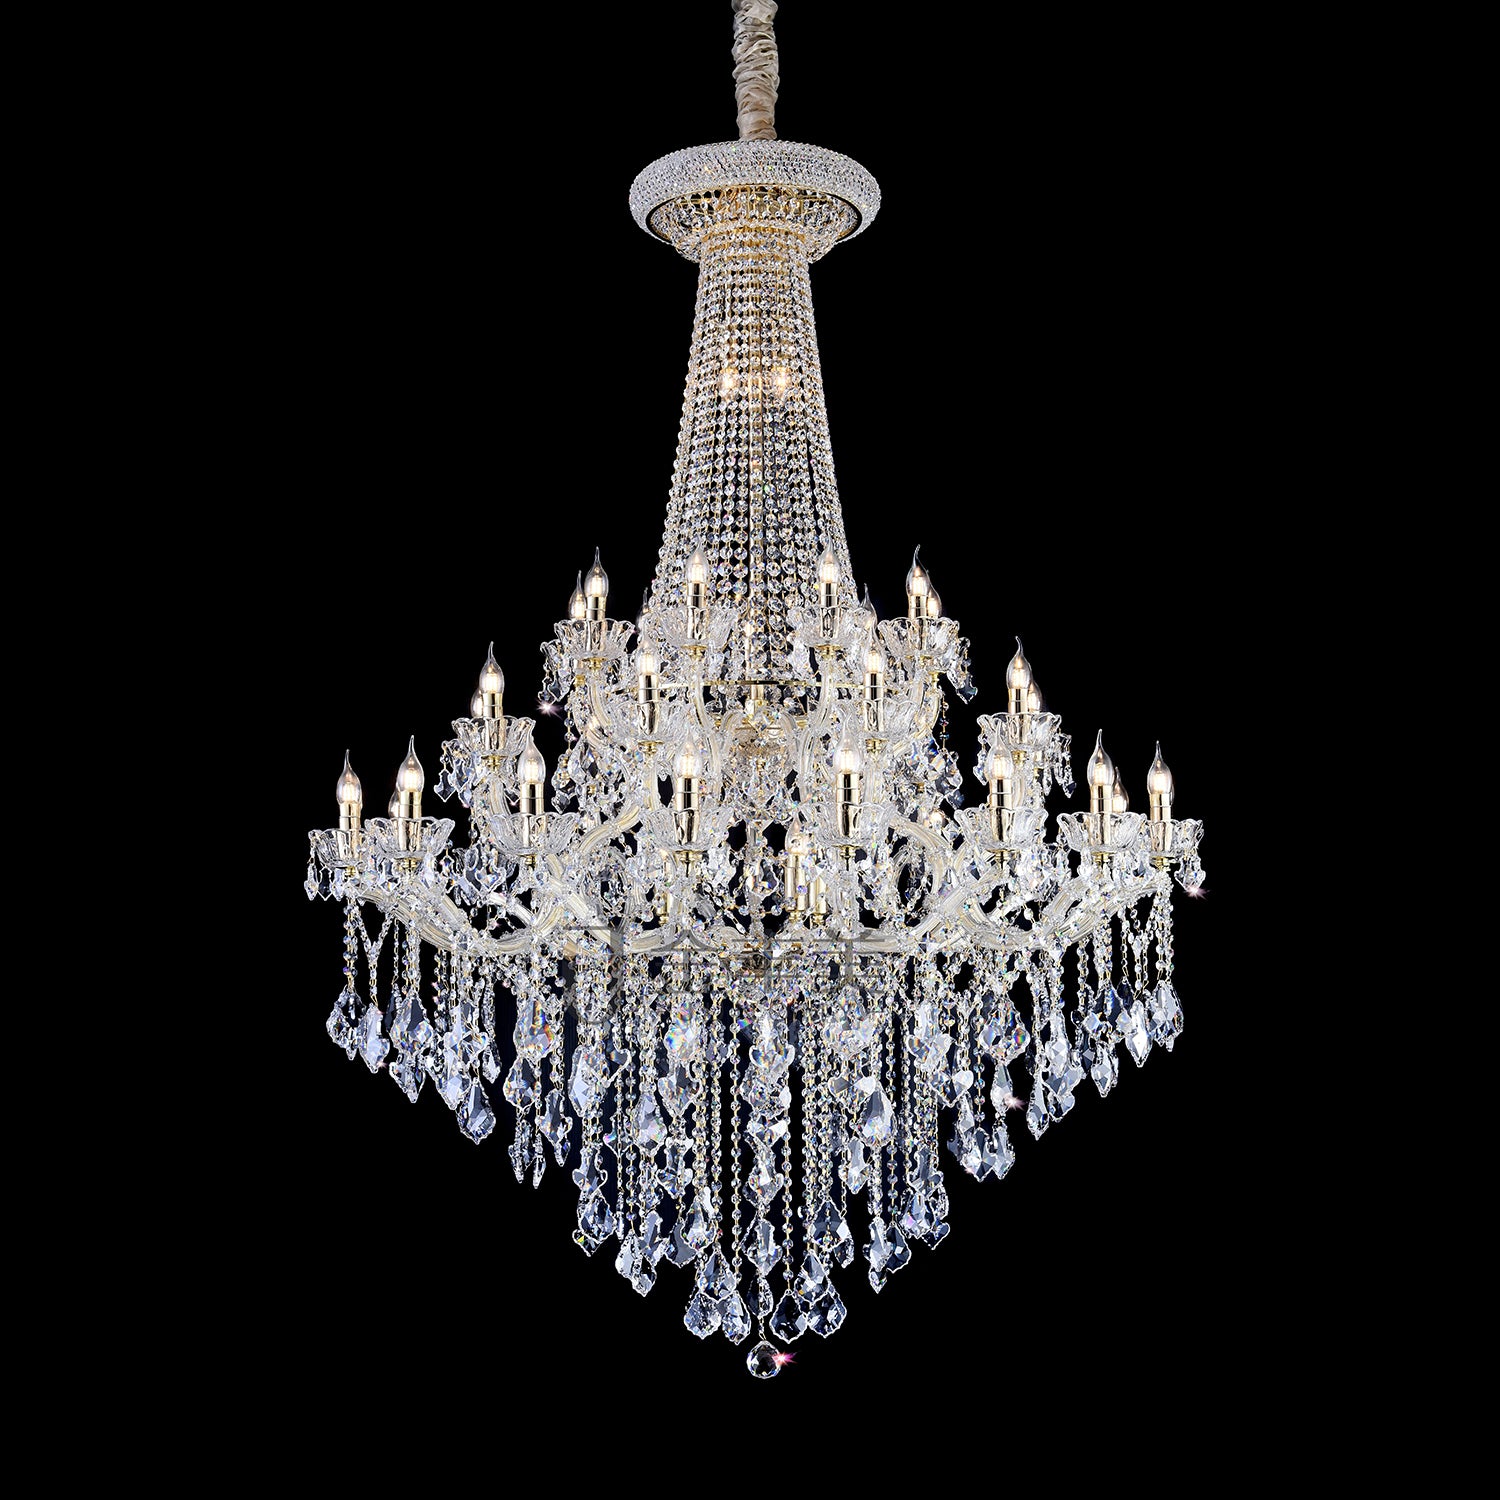 chandelier,chandeliers,pendant,crystal,metal,clear crystal,candle,branch,round,raindrop,teardrop,extra large,oversized,large,huge,big,round,living room,luxury,dining room,modern,foyer,stairs,hallway,entrys,hotel lobby,duplex hall,loft